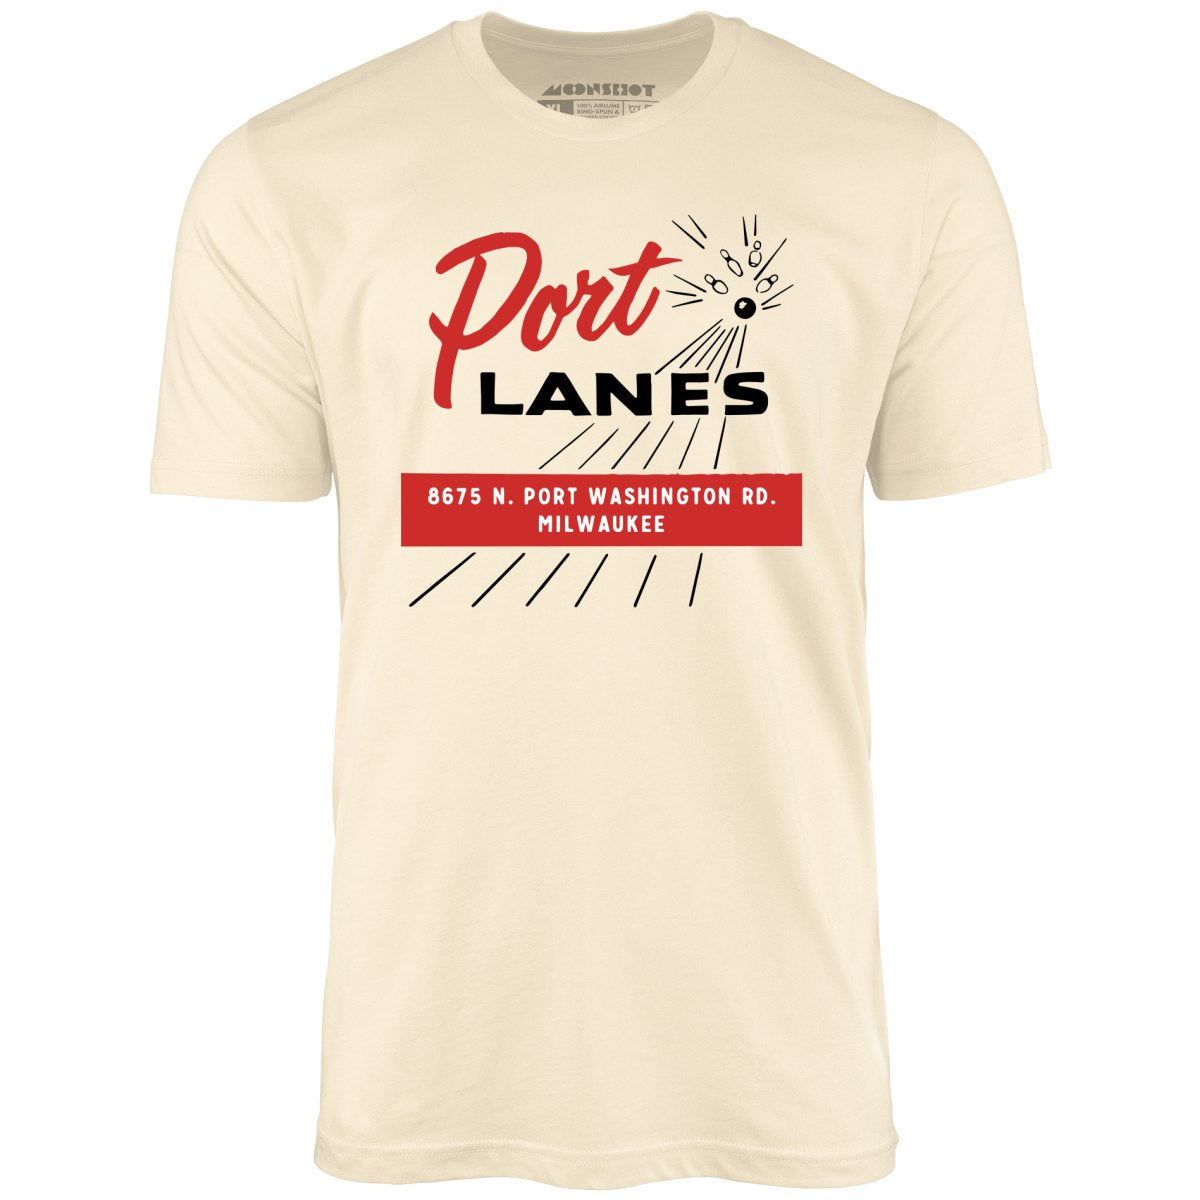 Port Lanes - Milwaukee, WI - Vintage Bowling Alley - Unisex T-Shirt